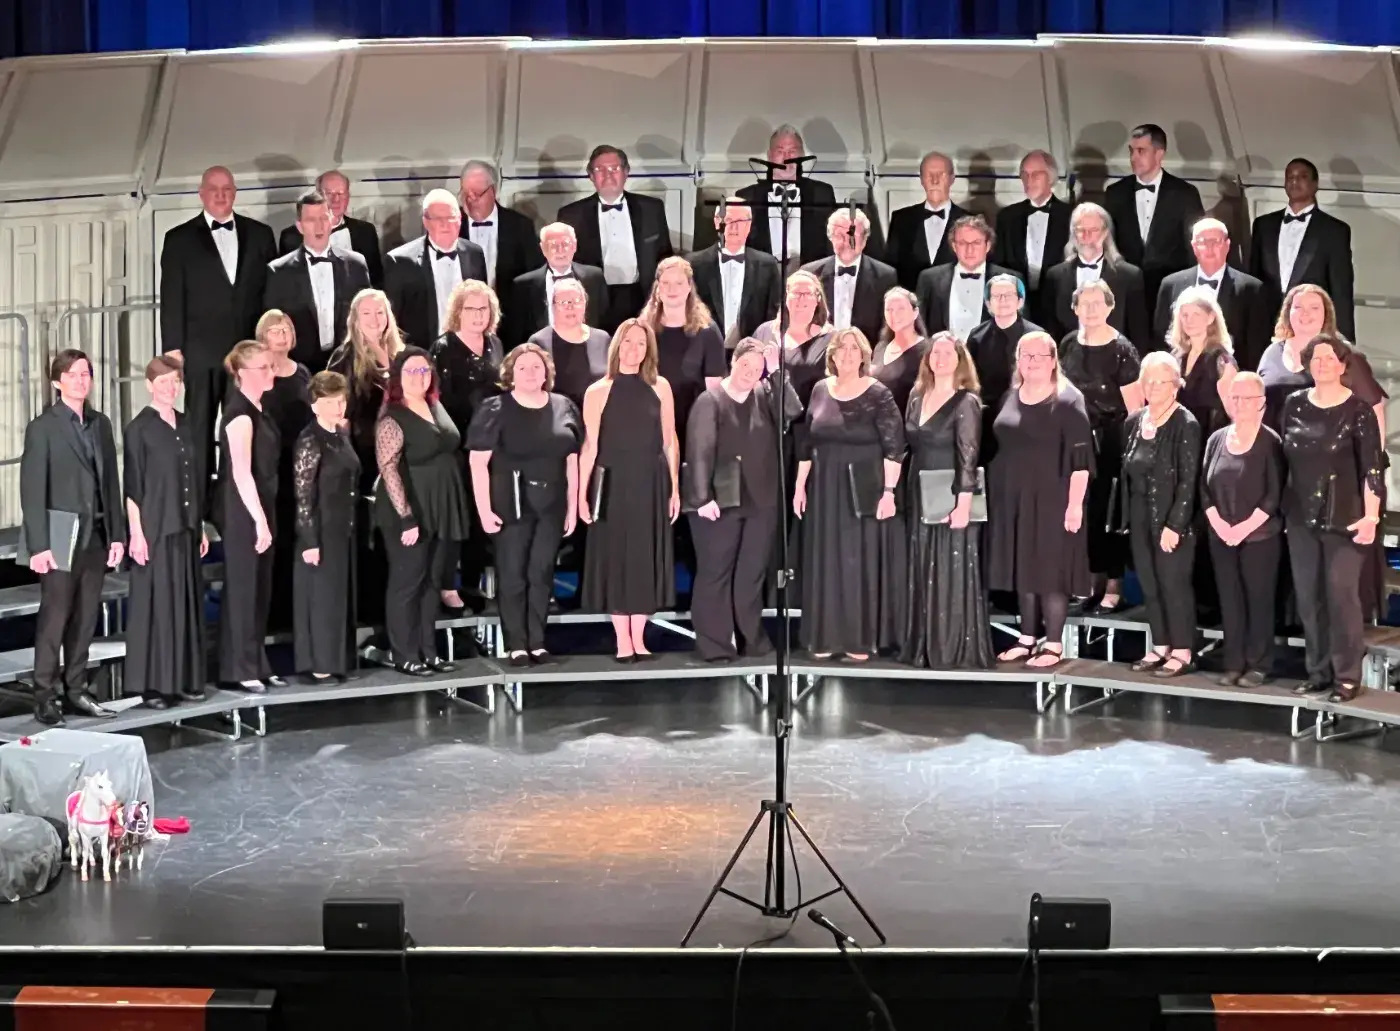 Stankiewicz brings her voice to Cantate Carlisle - Cantate Carlisle